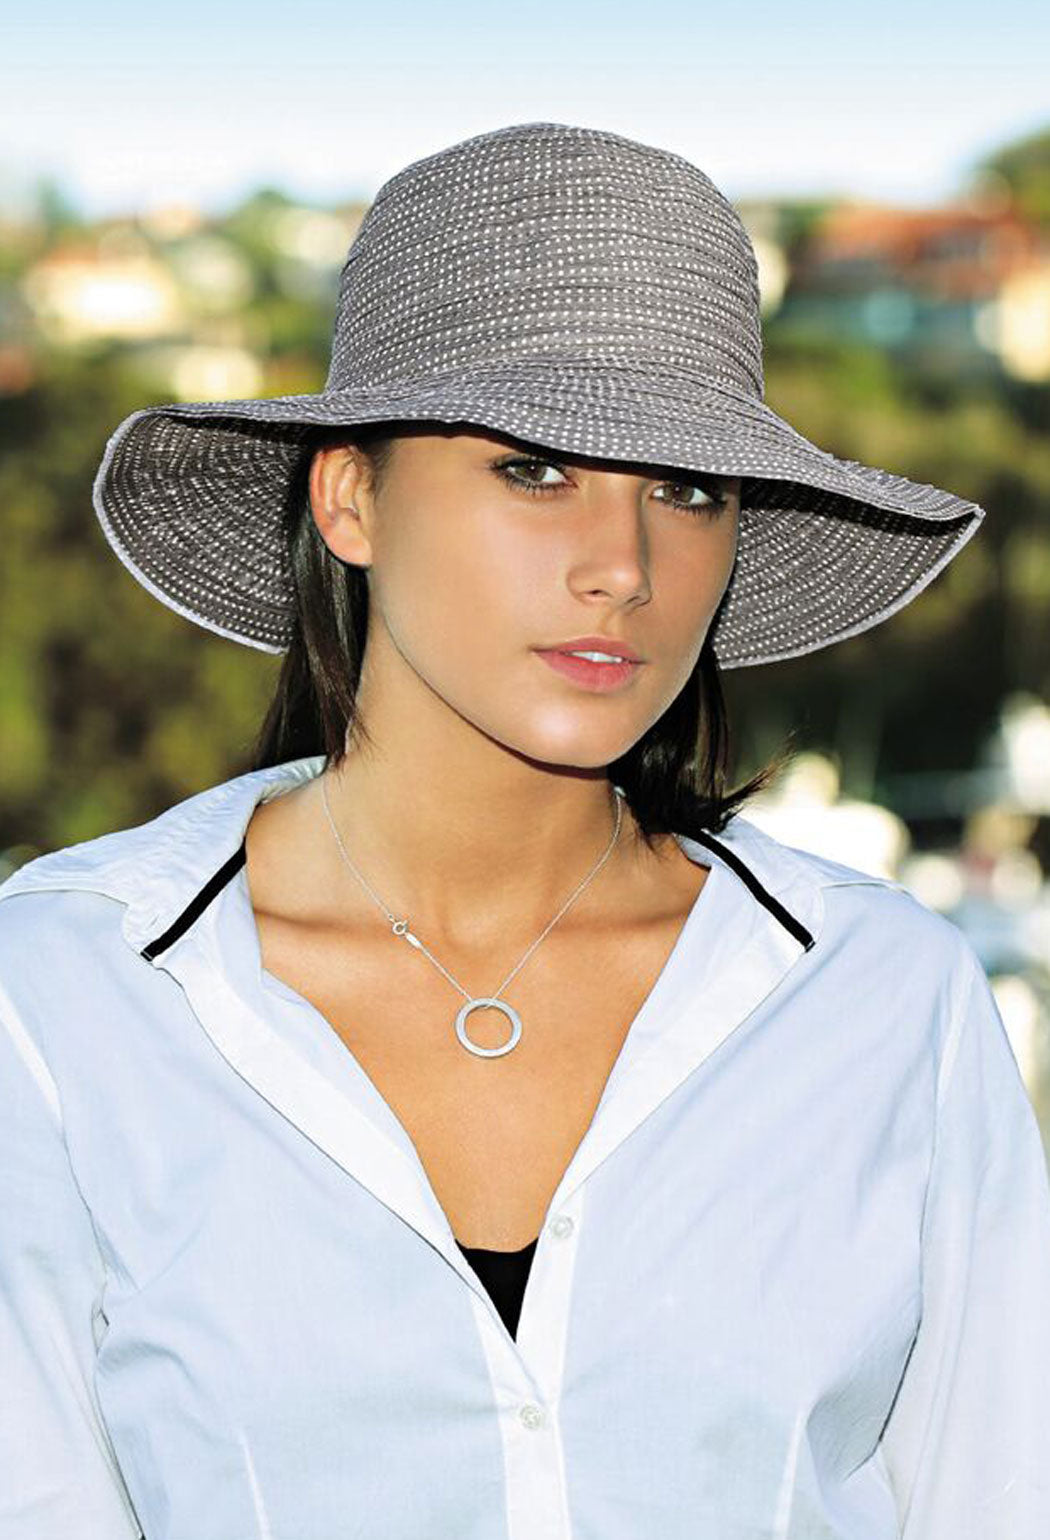 Sun Hats For Women Gardening Hat Wide Brim Beach Sun Protection Breathable  Cotton Summer Hat With Fold-up Brim